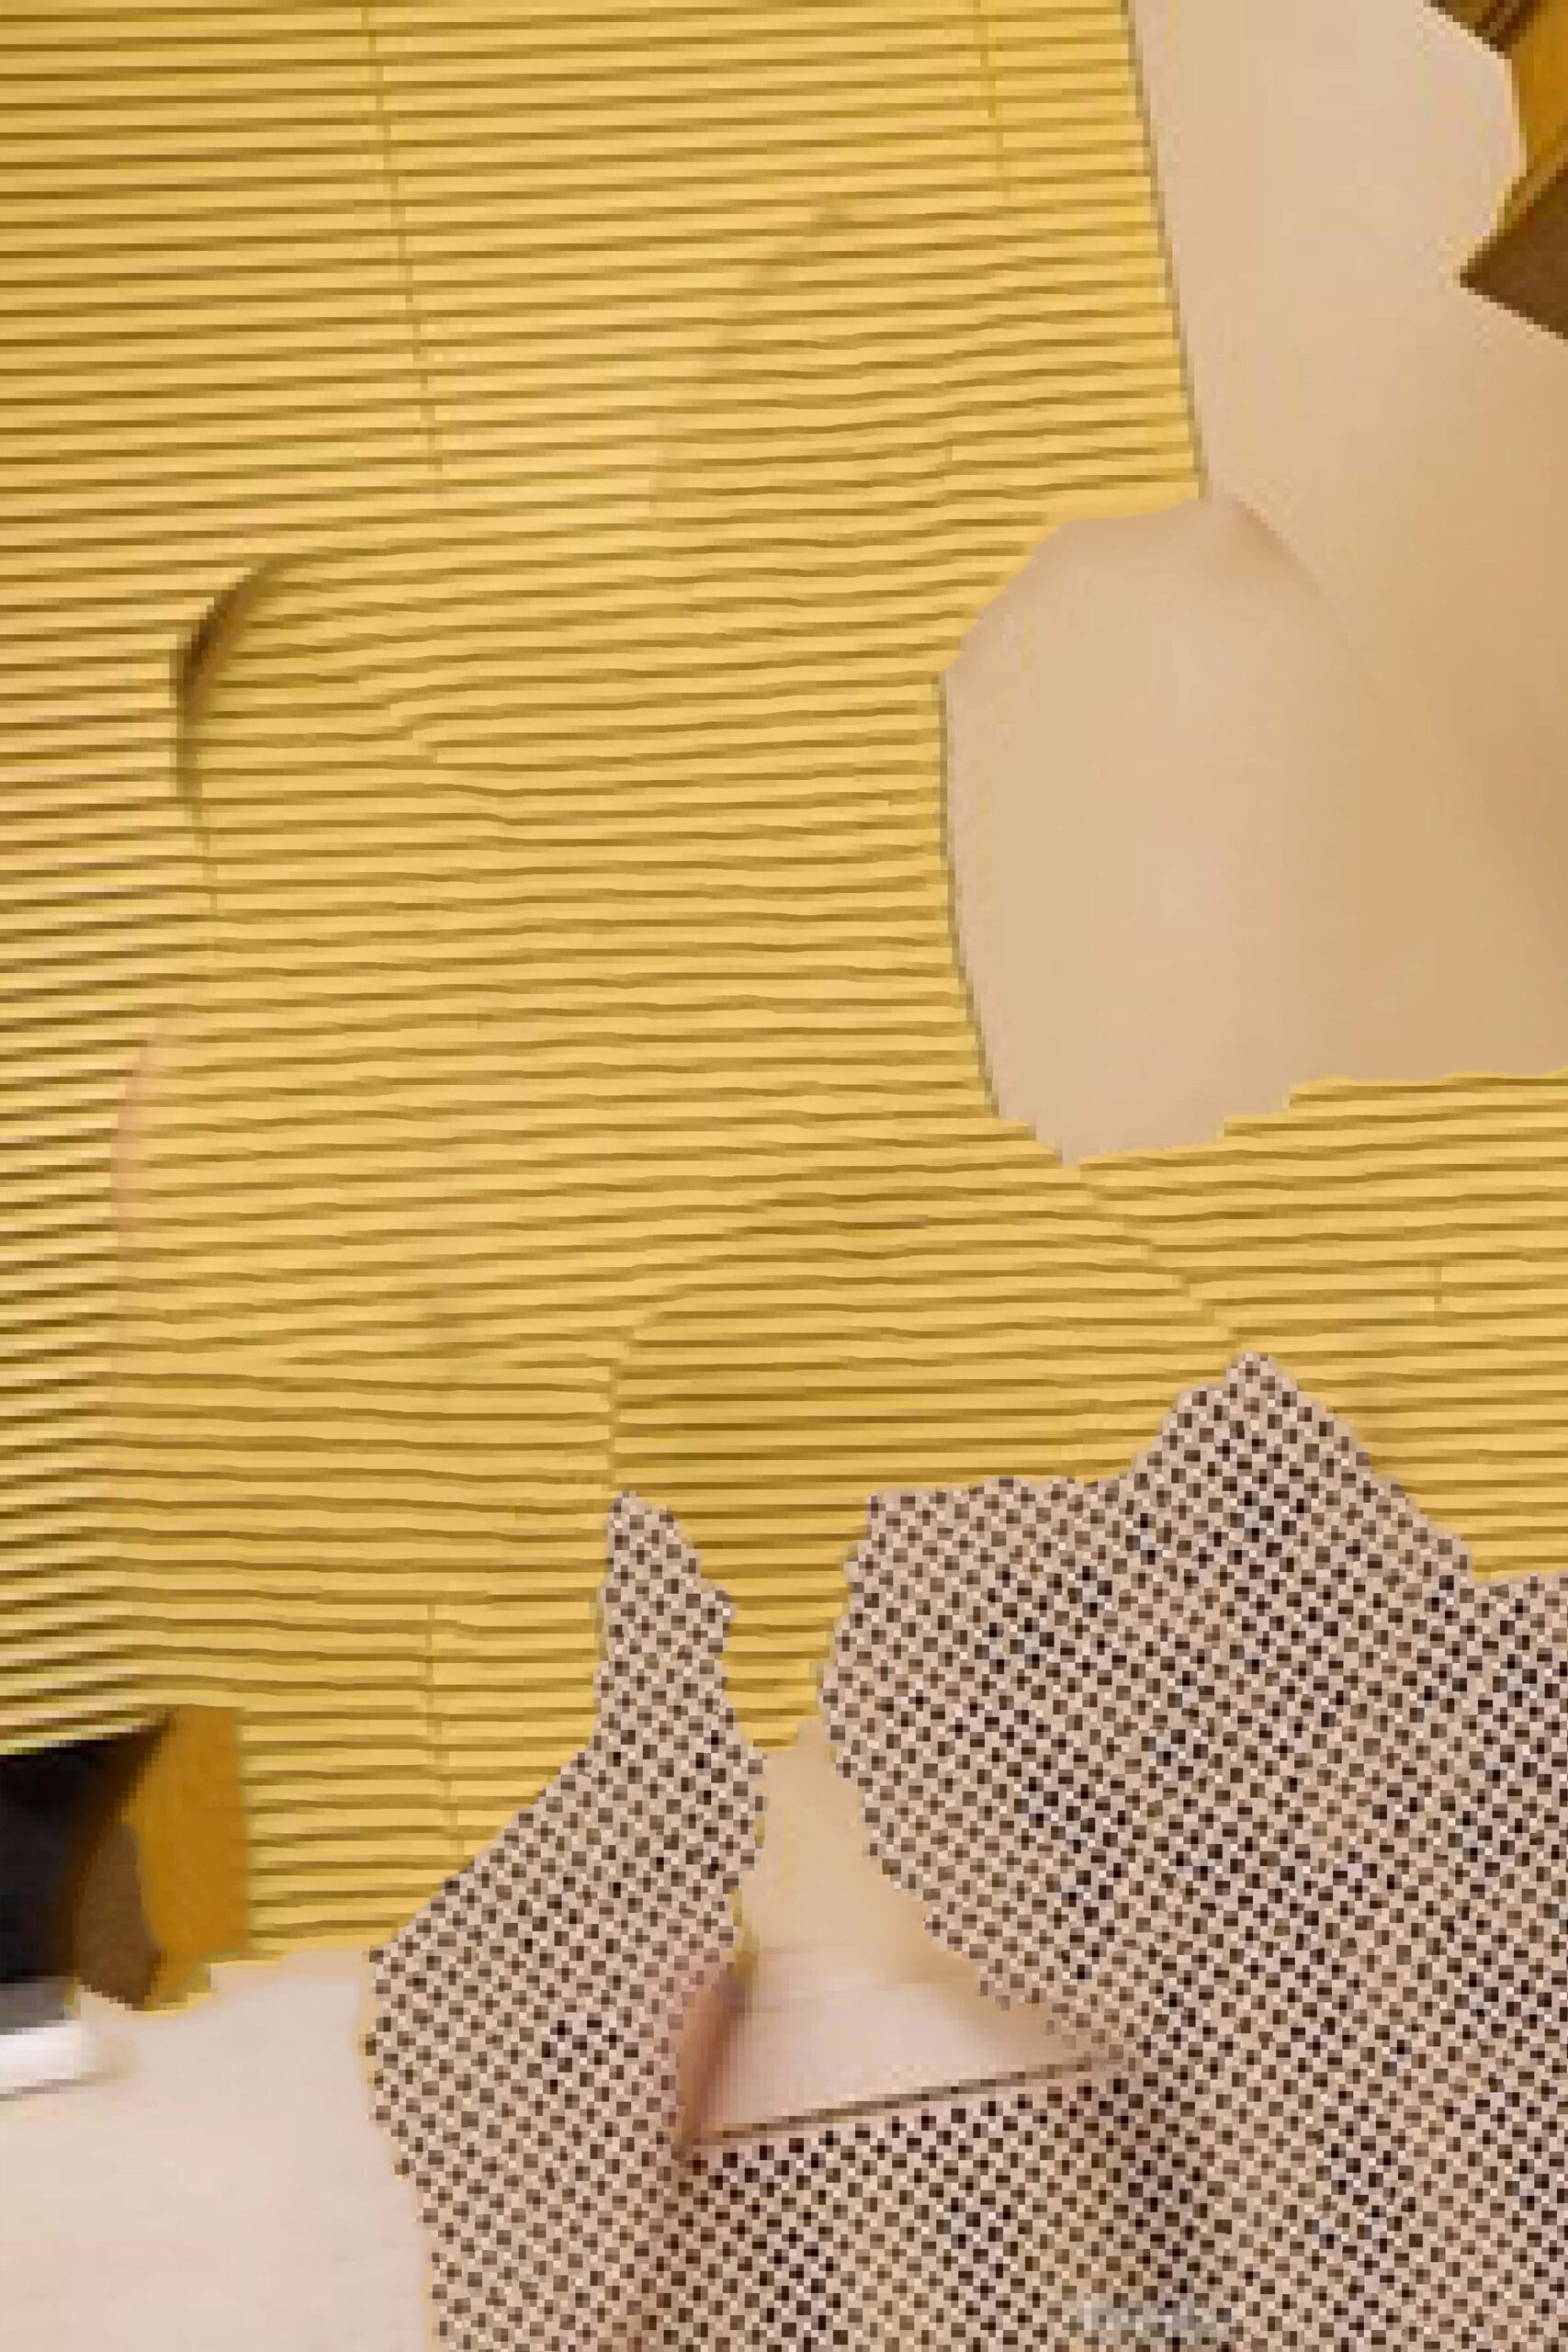 Traces of butter yellow venetian blinds and beige basket-woven texture overlap in an abstract collage.